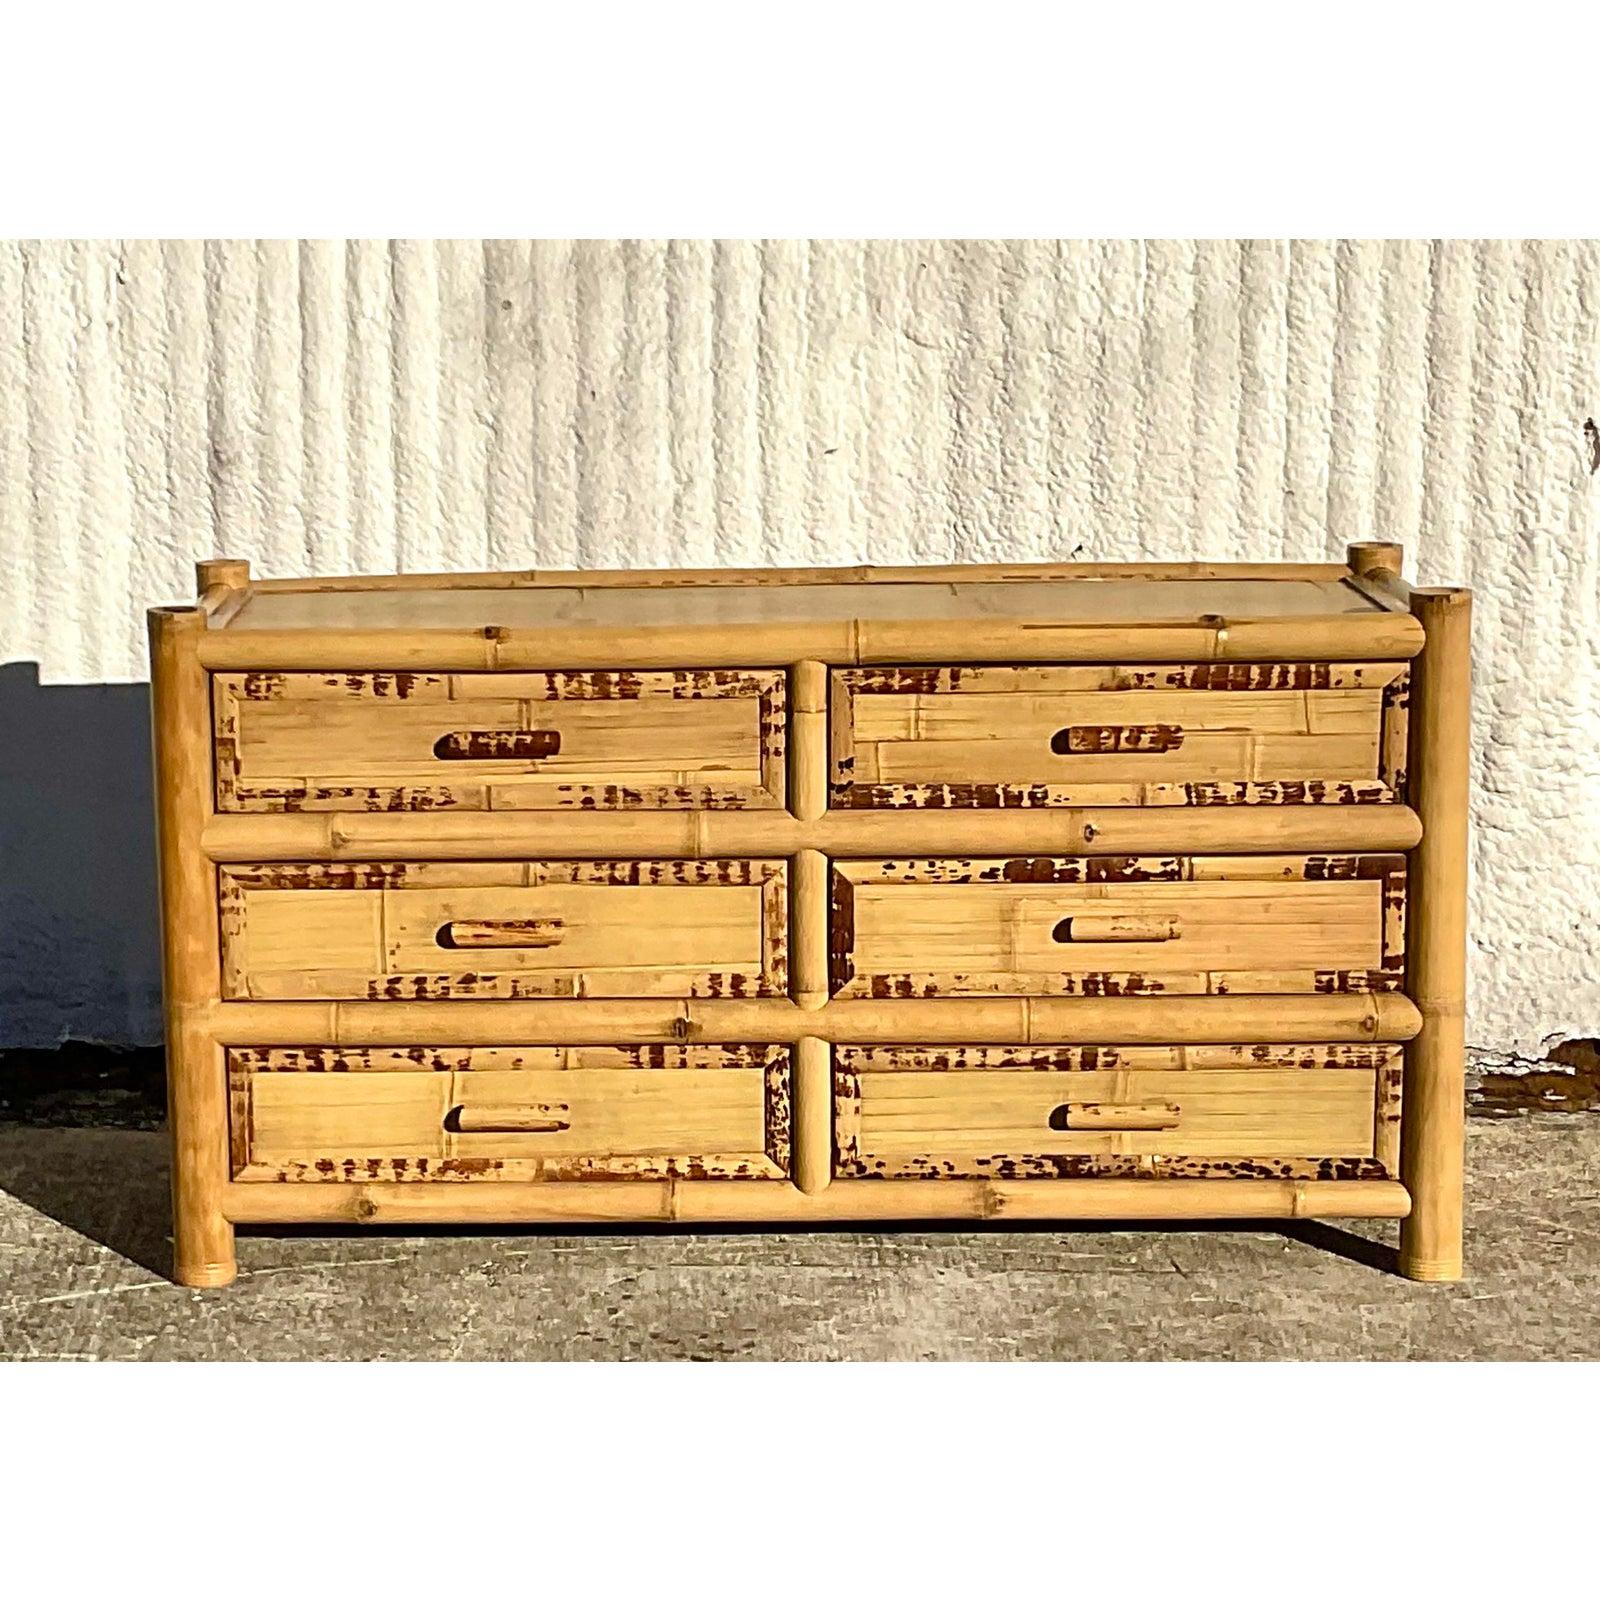 Fantastic vintage Coastal dresser. Chic elephant bamboo frame with inset split bamboo inset panels. Lots of texture and drama. Acquired from a Palm Beach estate.